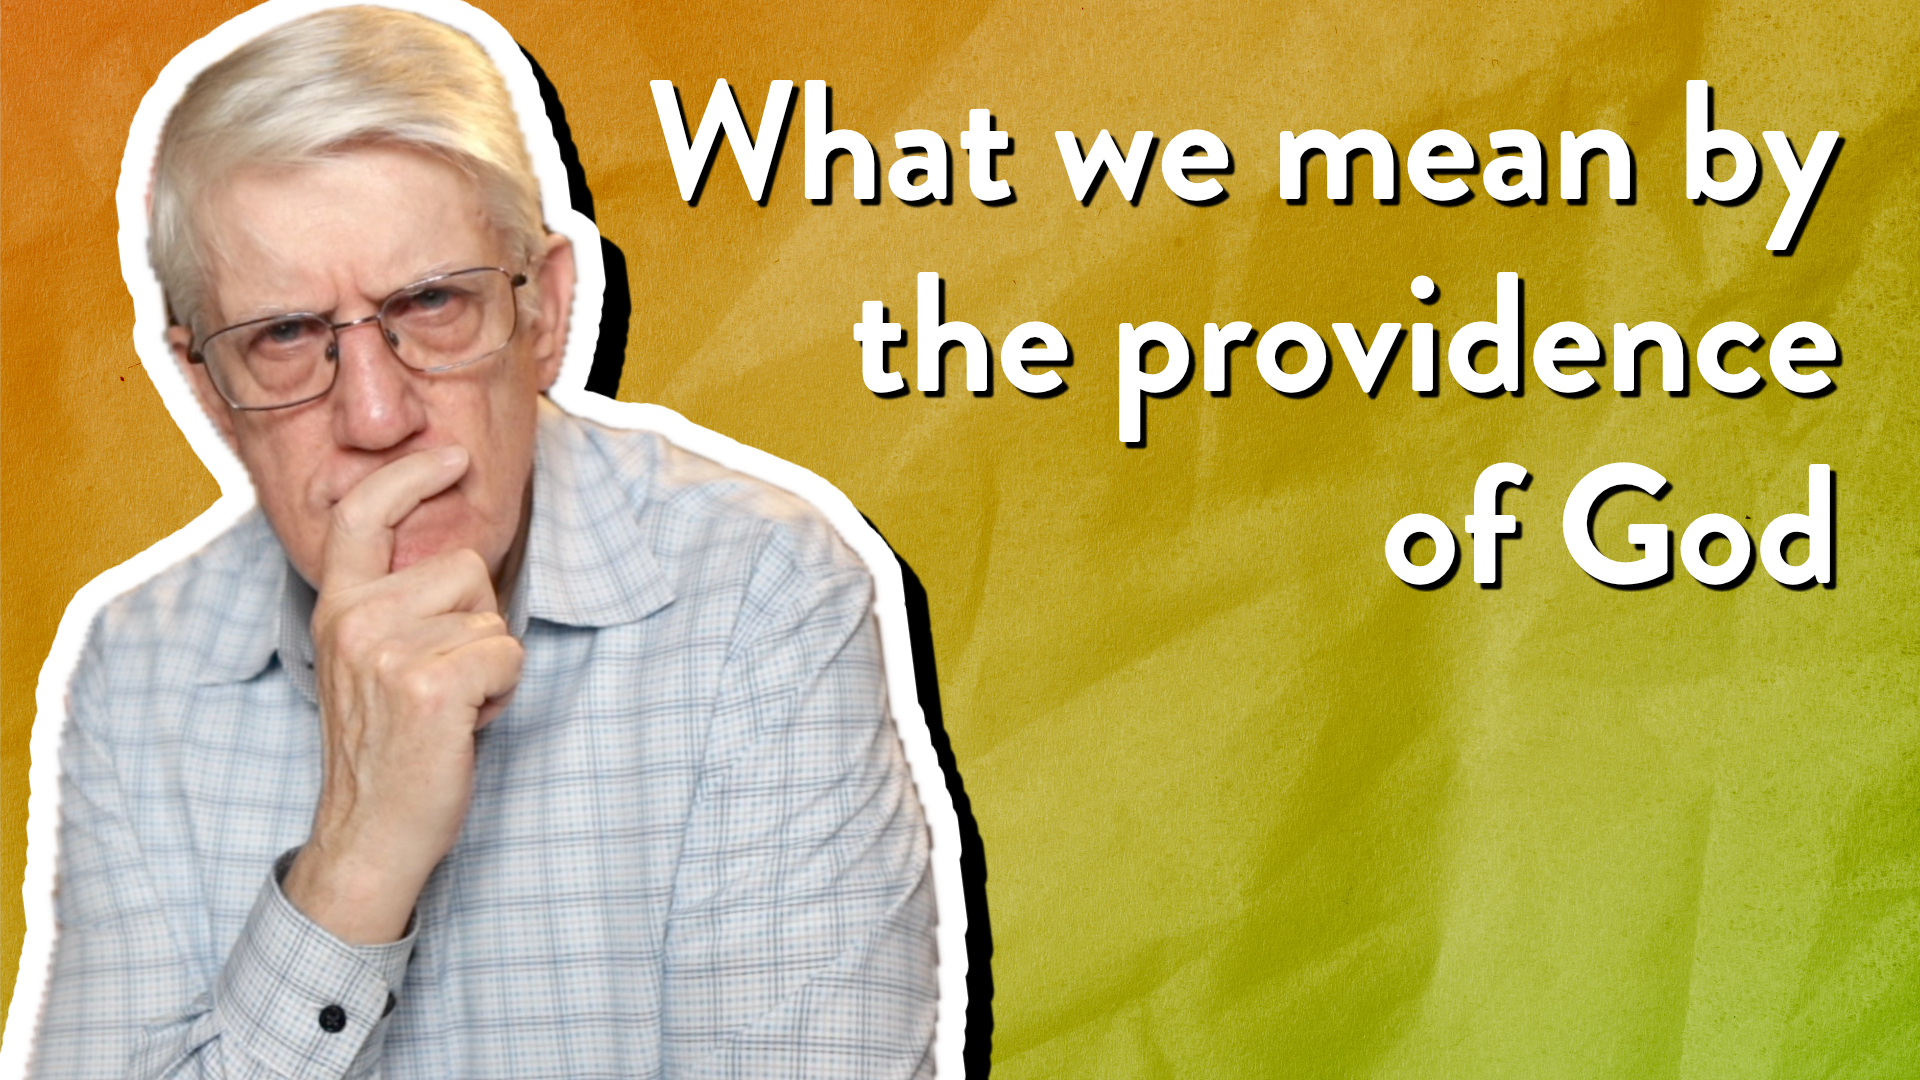 What we mean by the providence of God